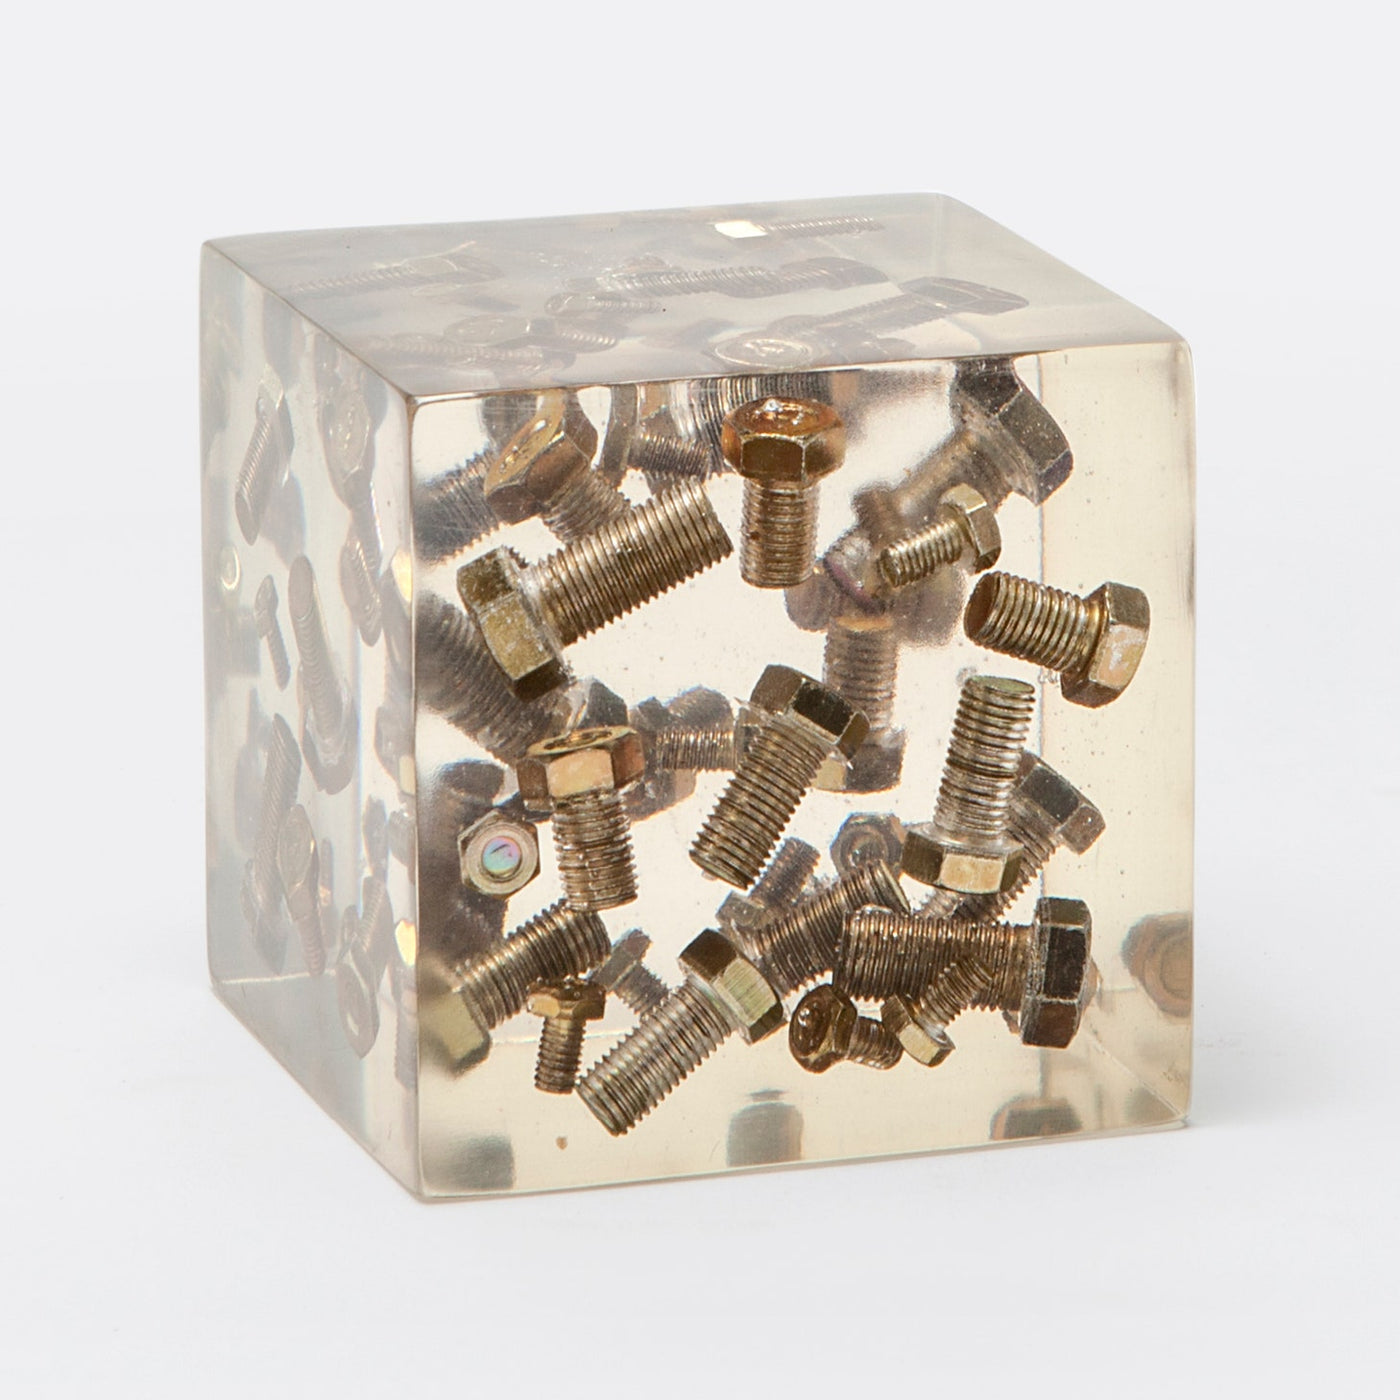 OBJECT BOLTS IN RESIN (Available in 2 Sizes)